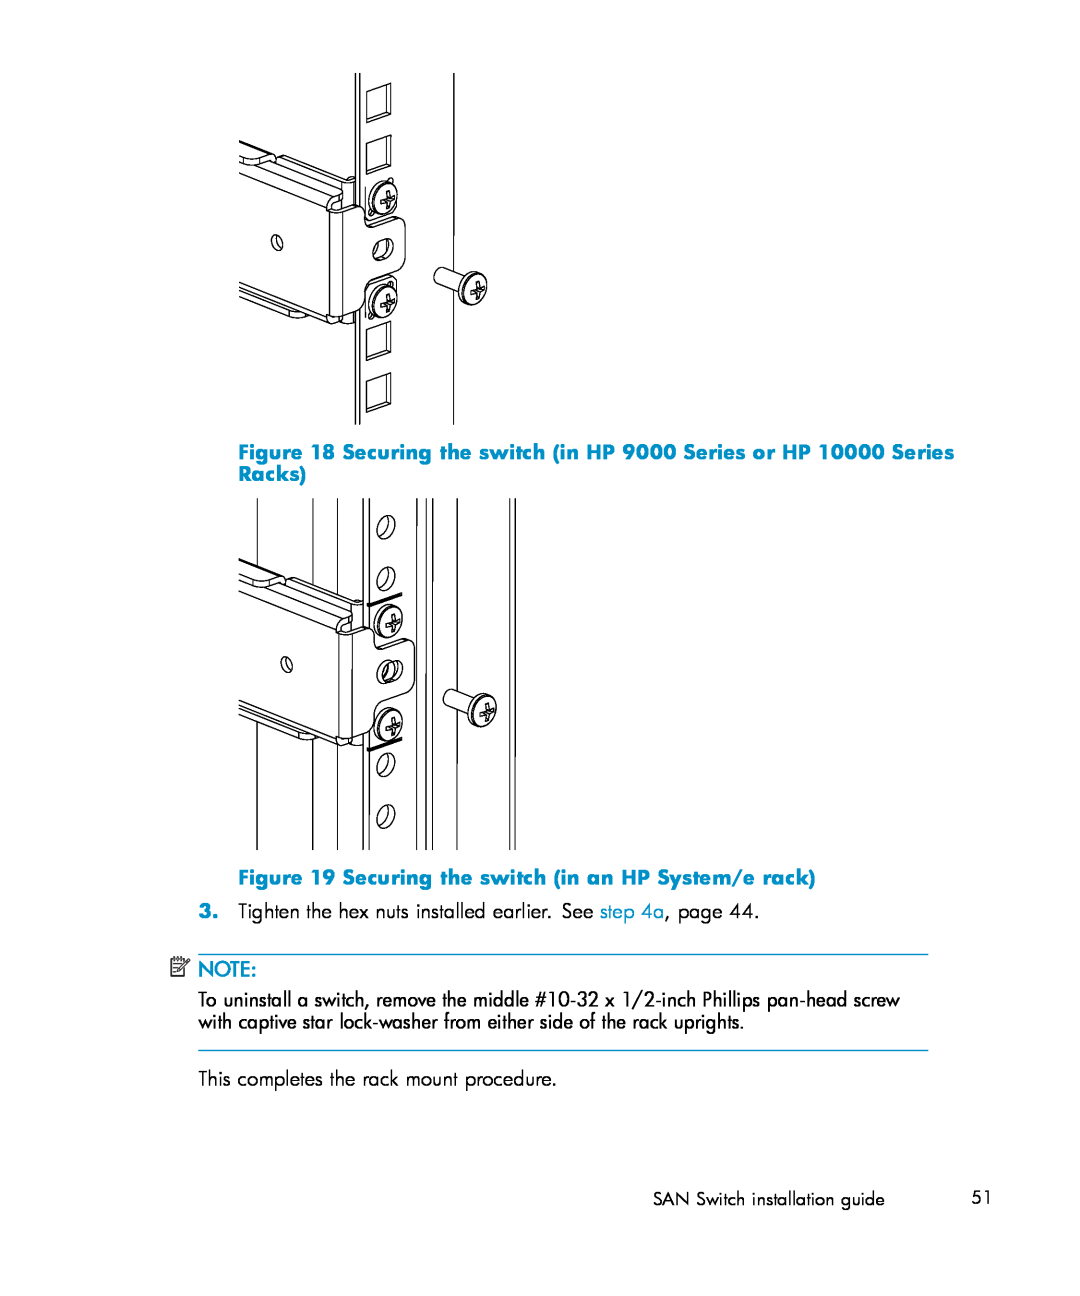 IBM AA-RWF3A-TE manual Securing the switch in an HP System/e rack 